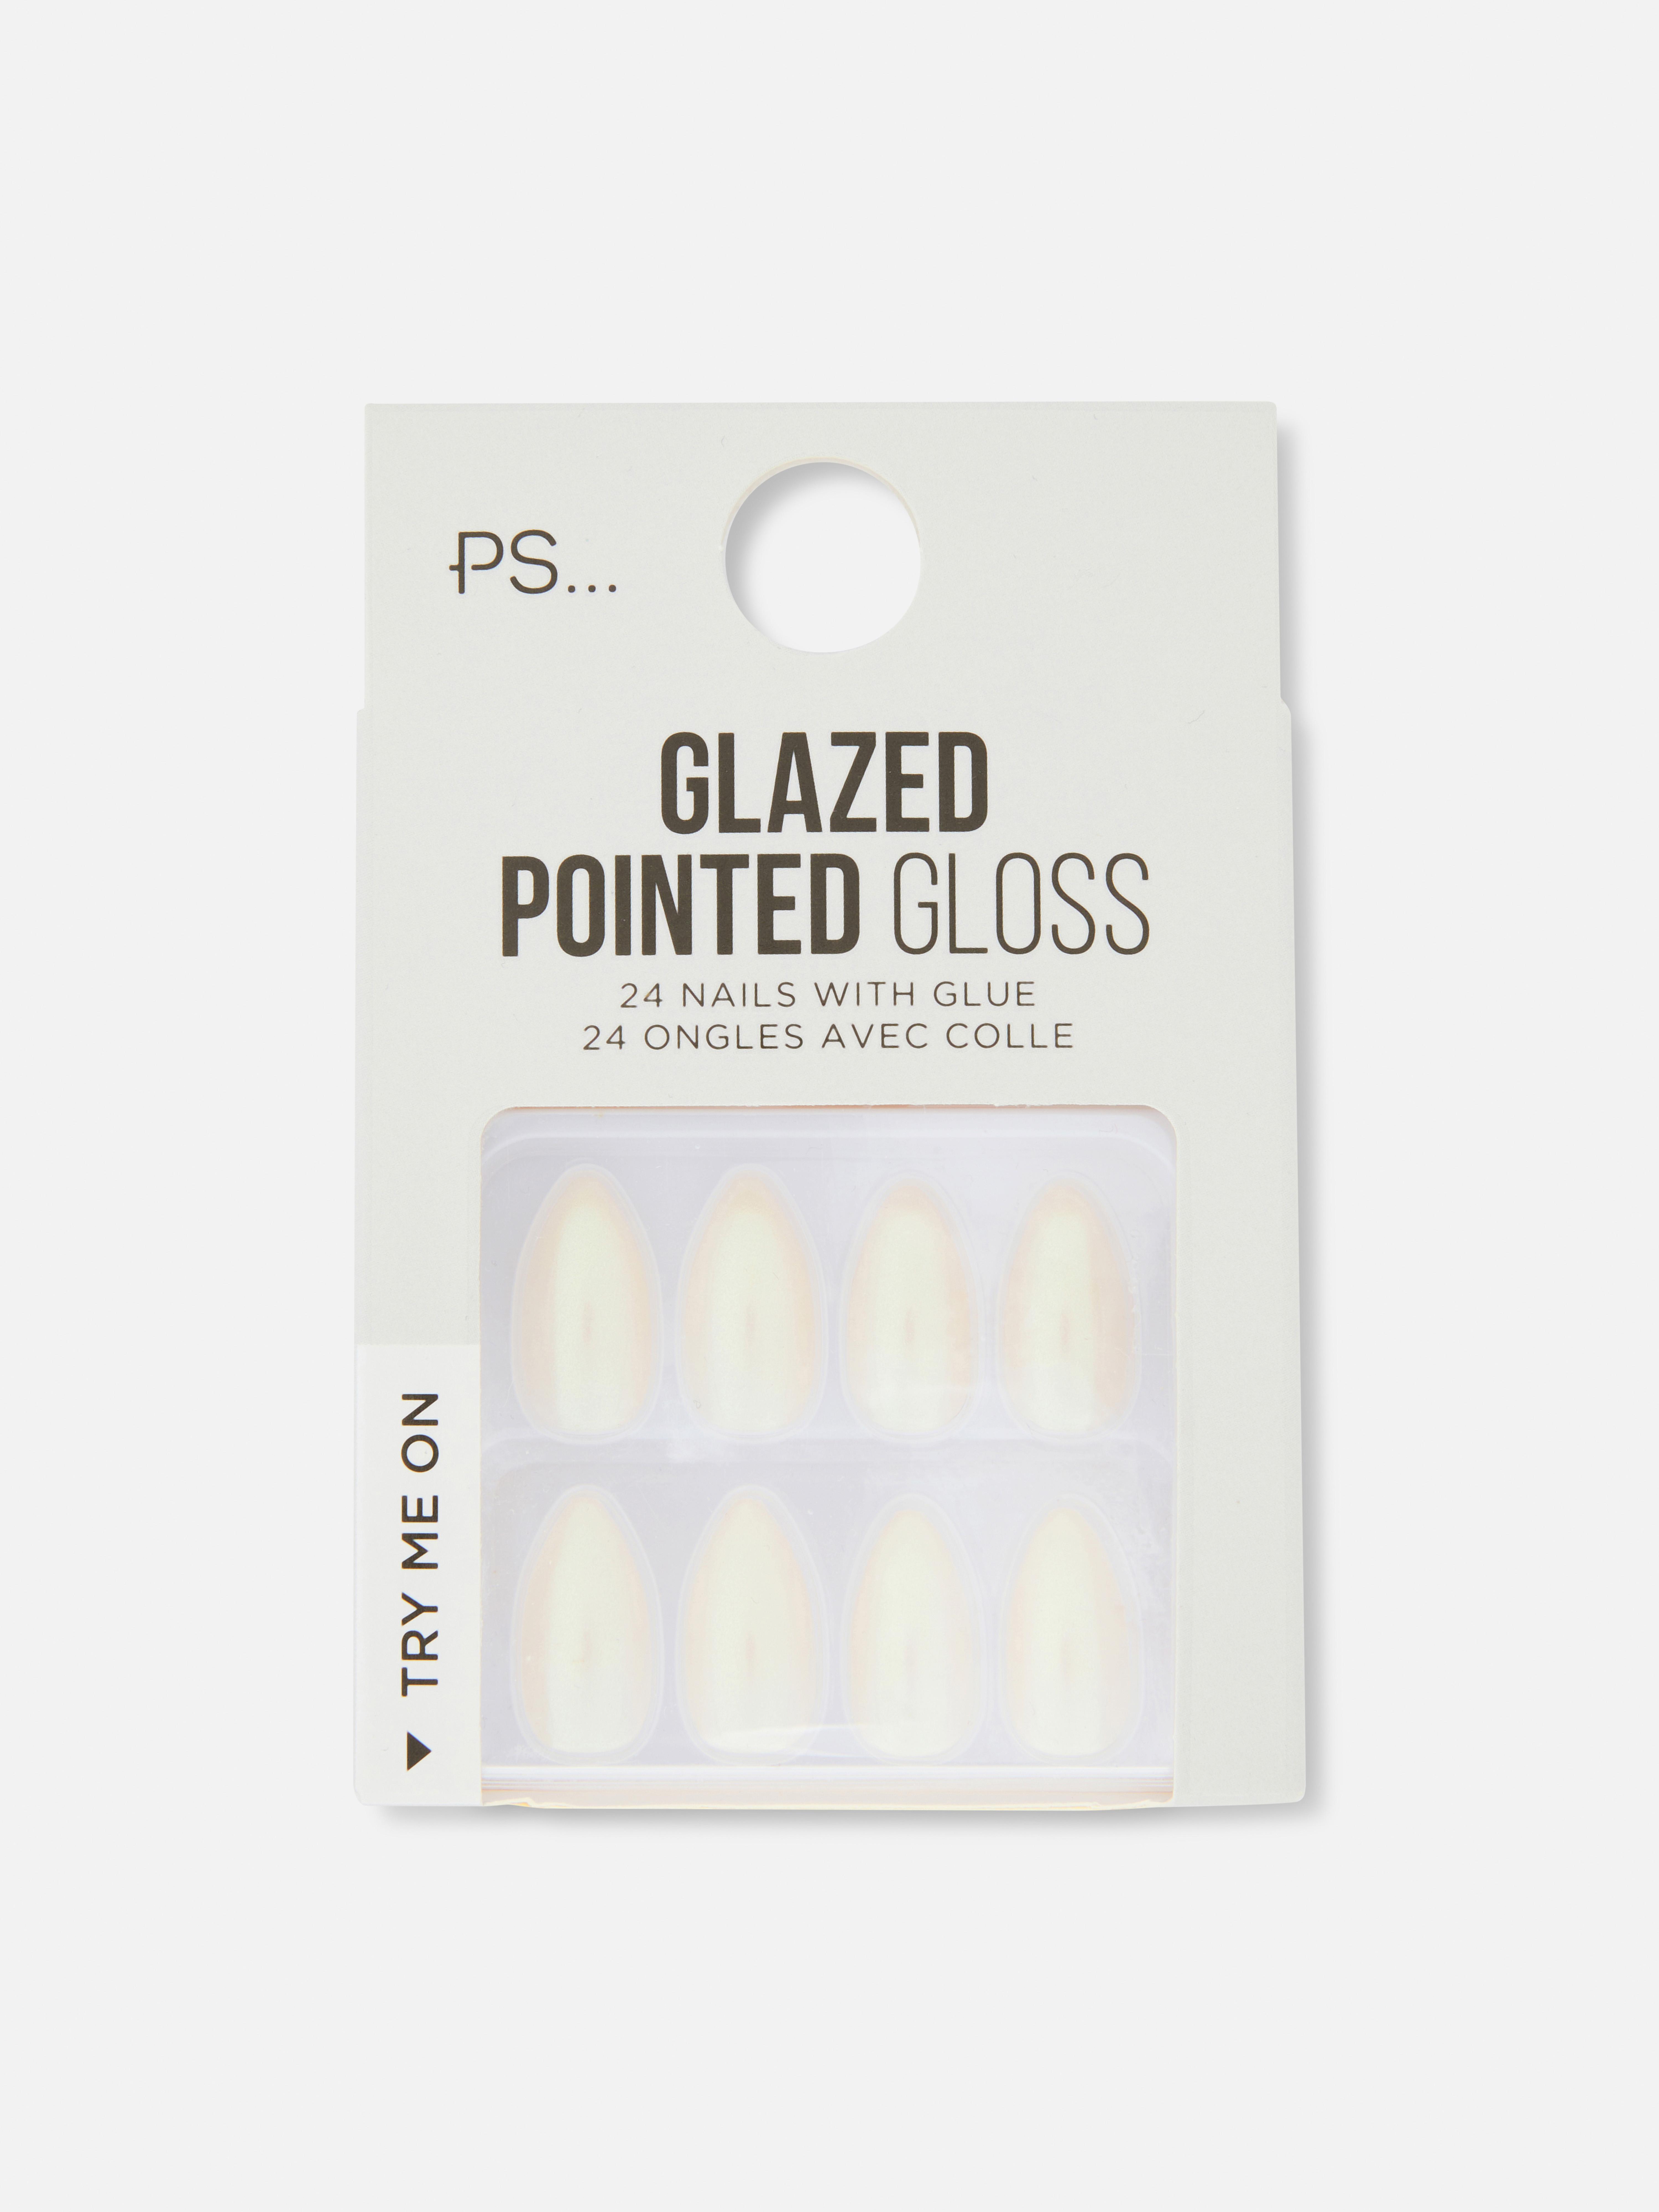 PS Glazed Pointed Faux Nails